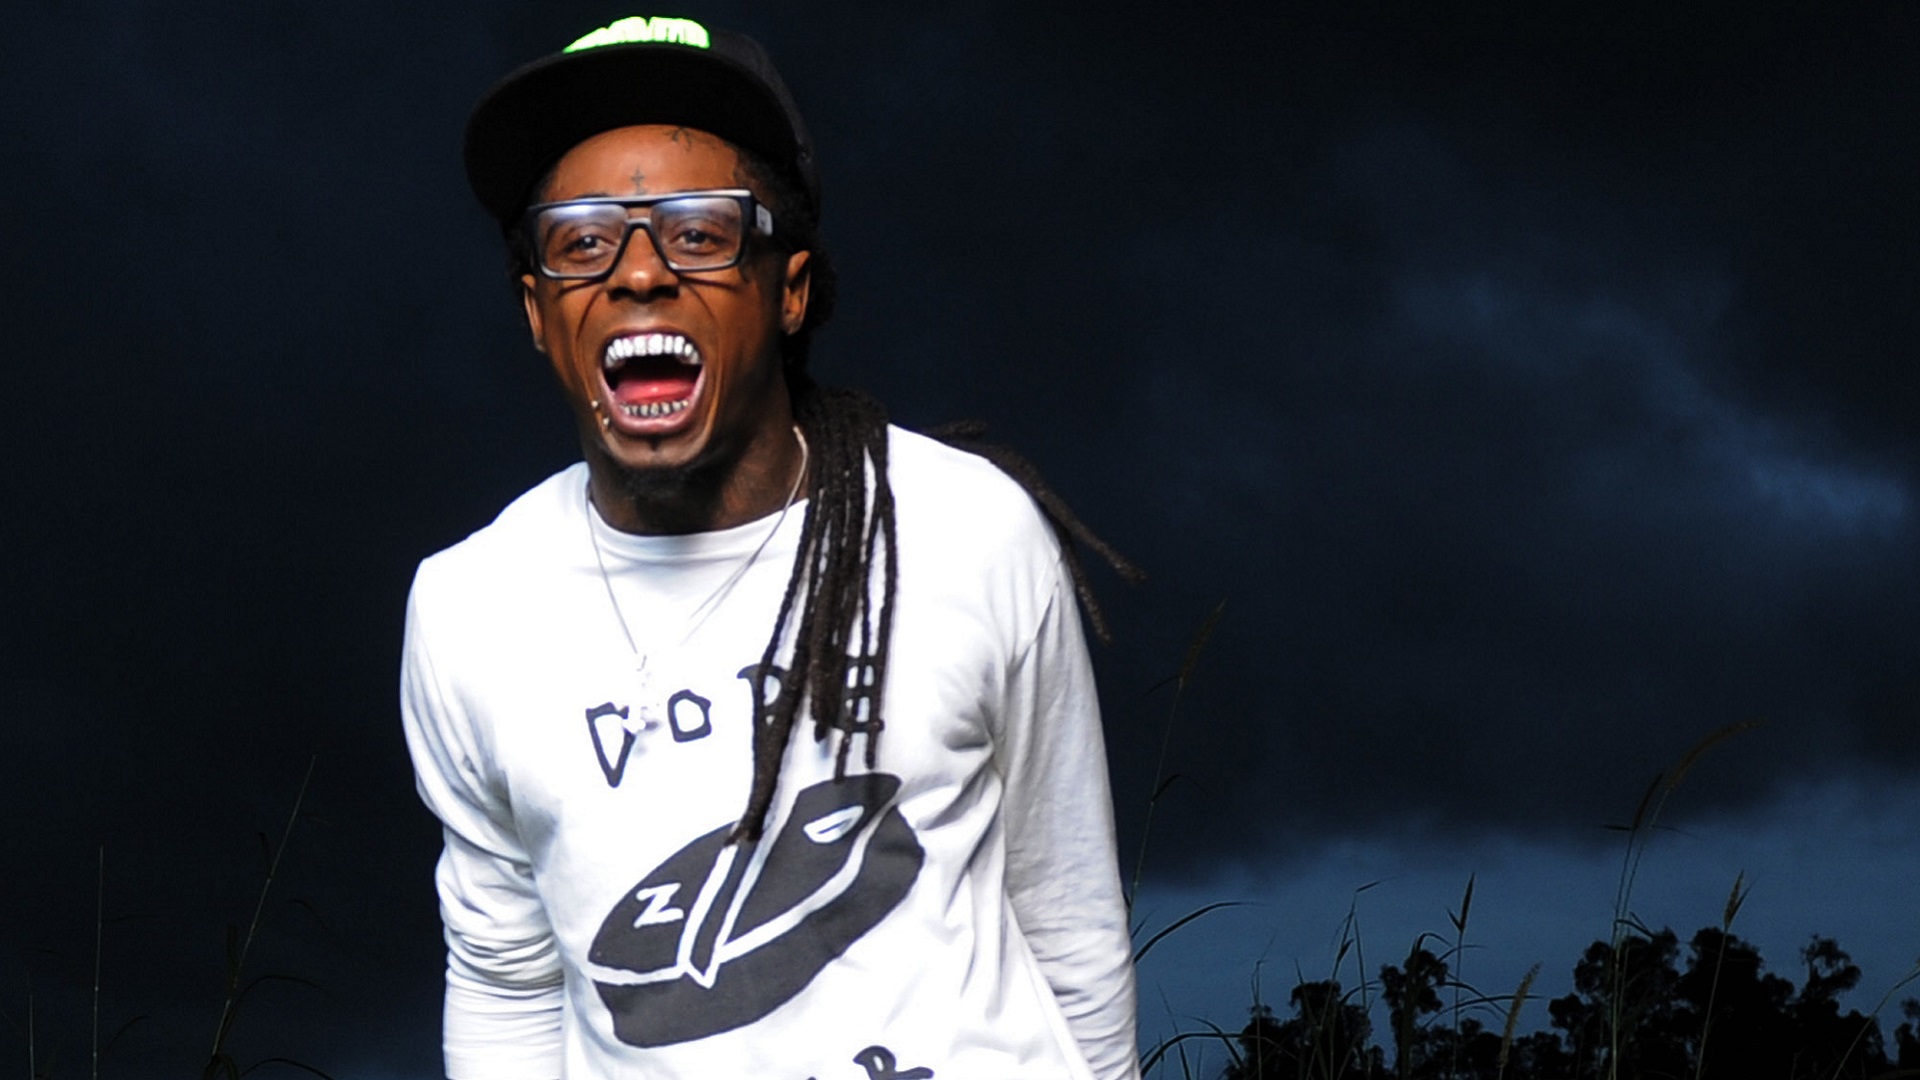 The Source Lil Wayne Announces "No Ceilings 2" Release Date